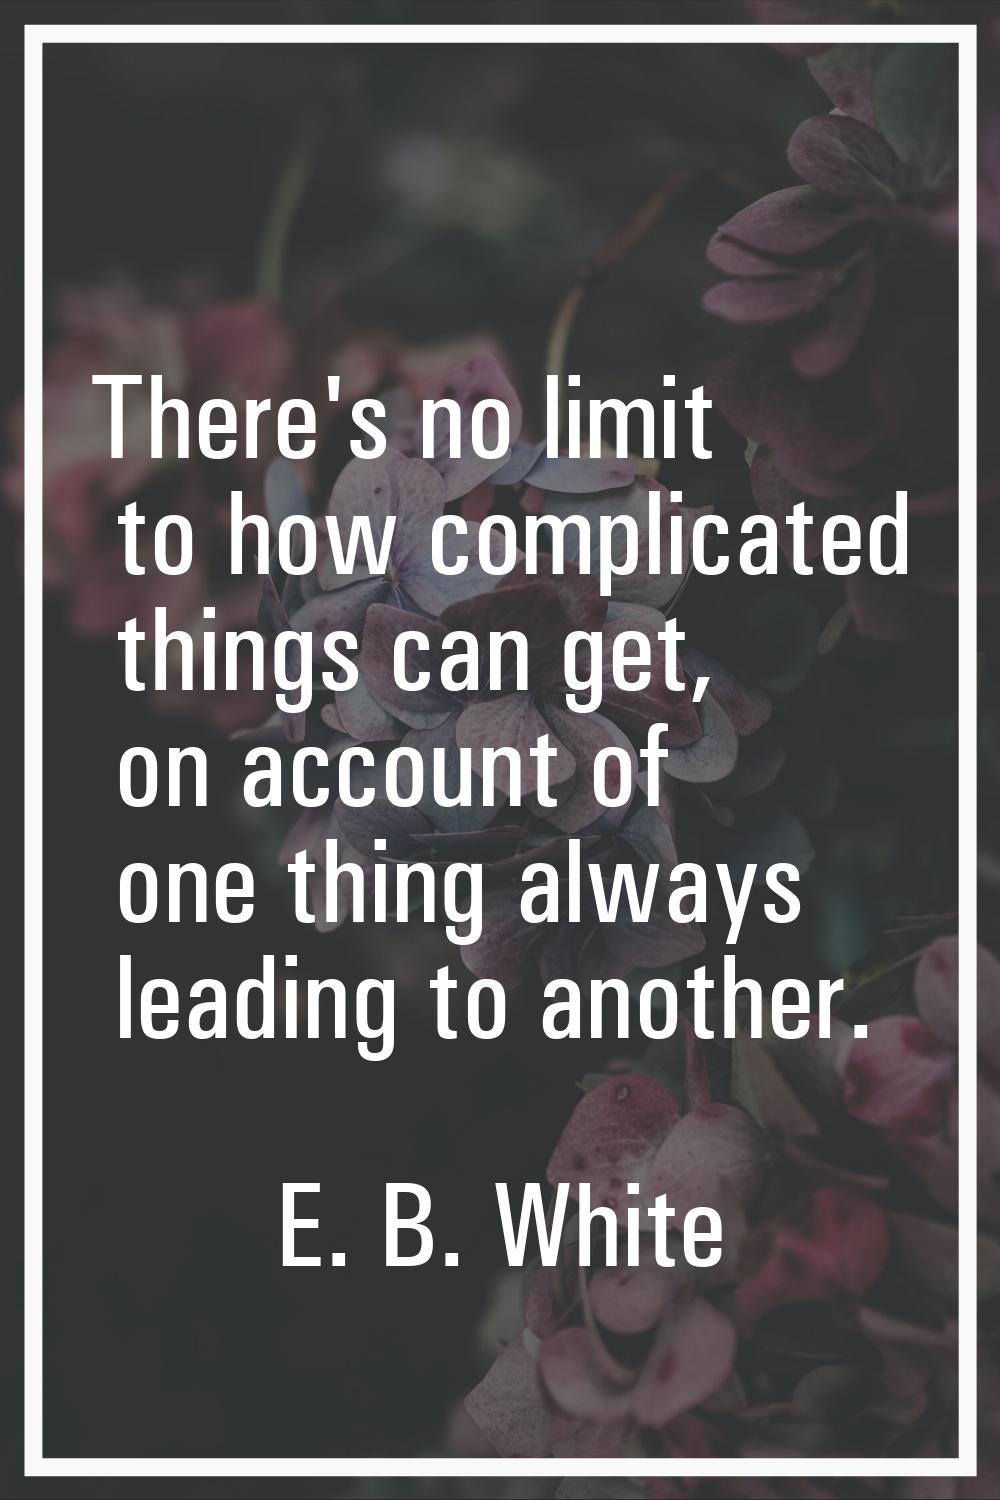 There's no limit to how complicated things can get, on account of one thing always leading to anoth